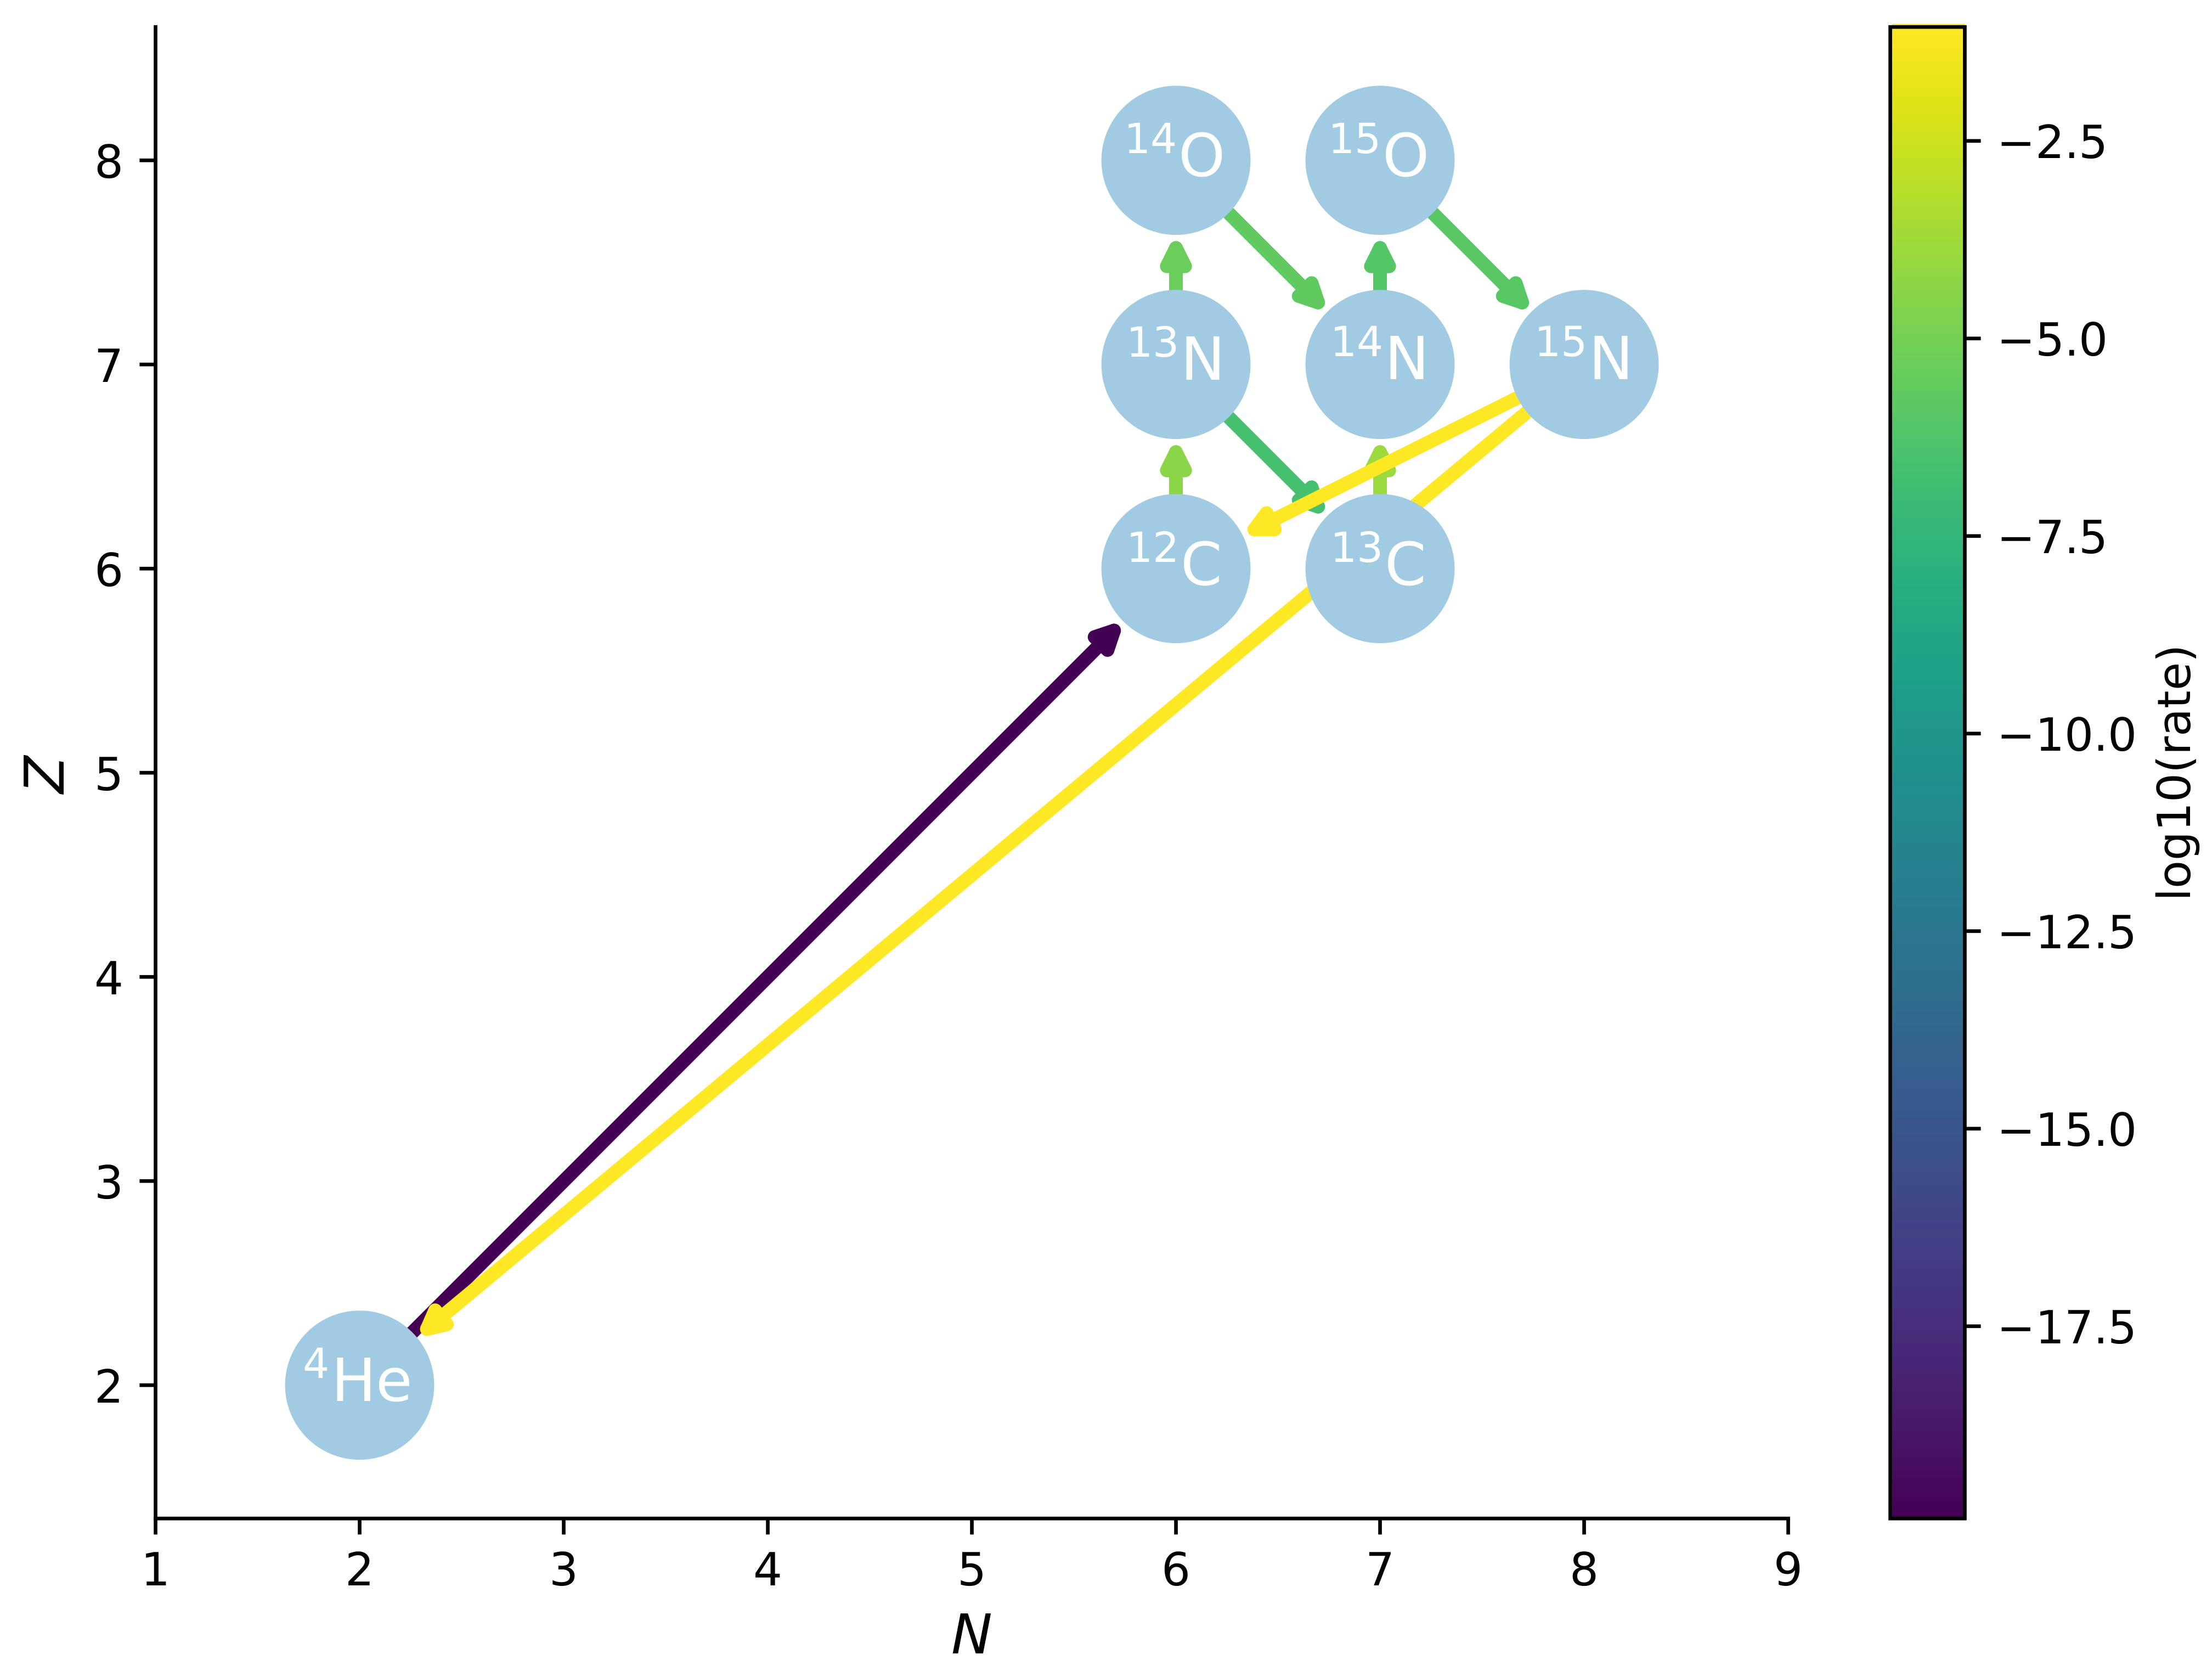 CNO
                      reaction network generated with pynucastro with
                      rate magnitudes shown with shaded arrows.